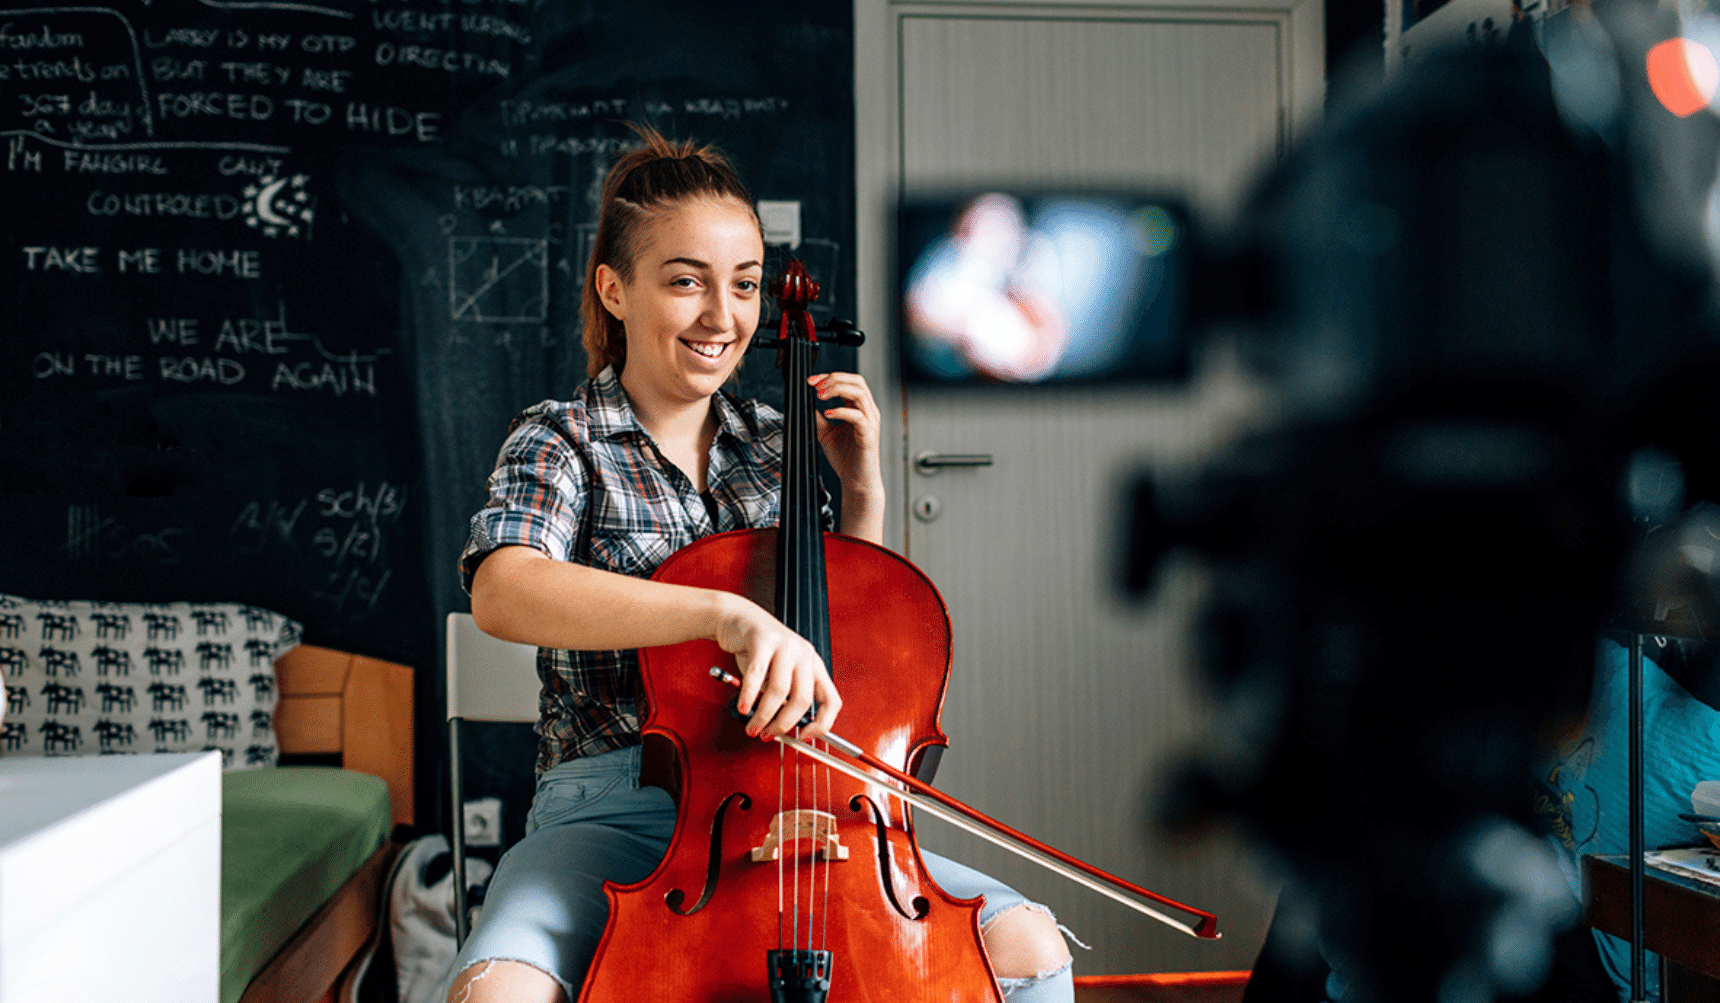 Girl with cello being recorded on a camera